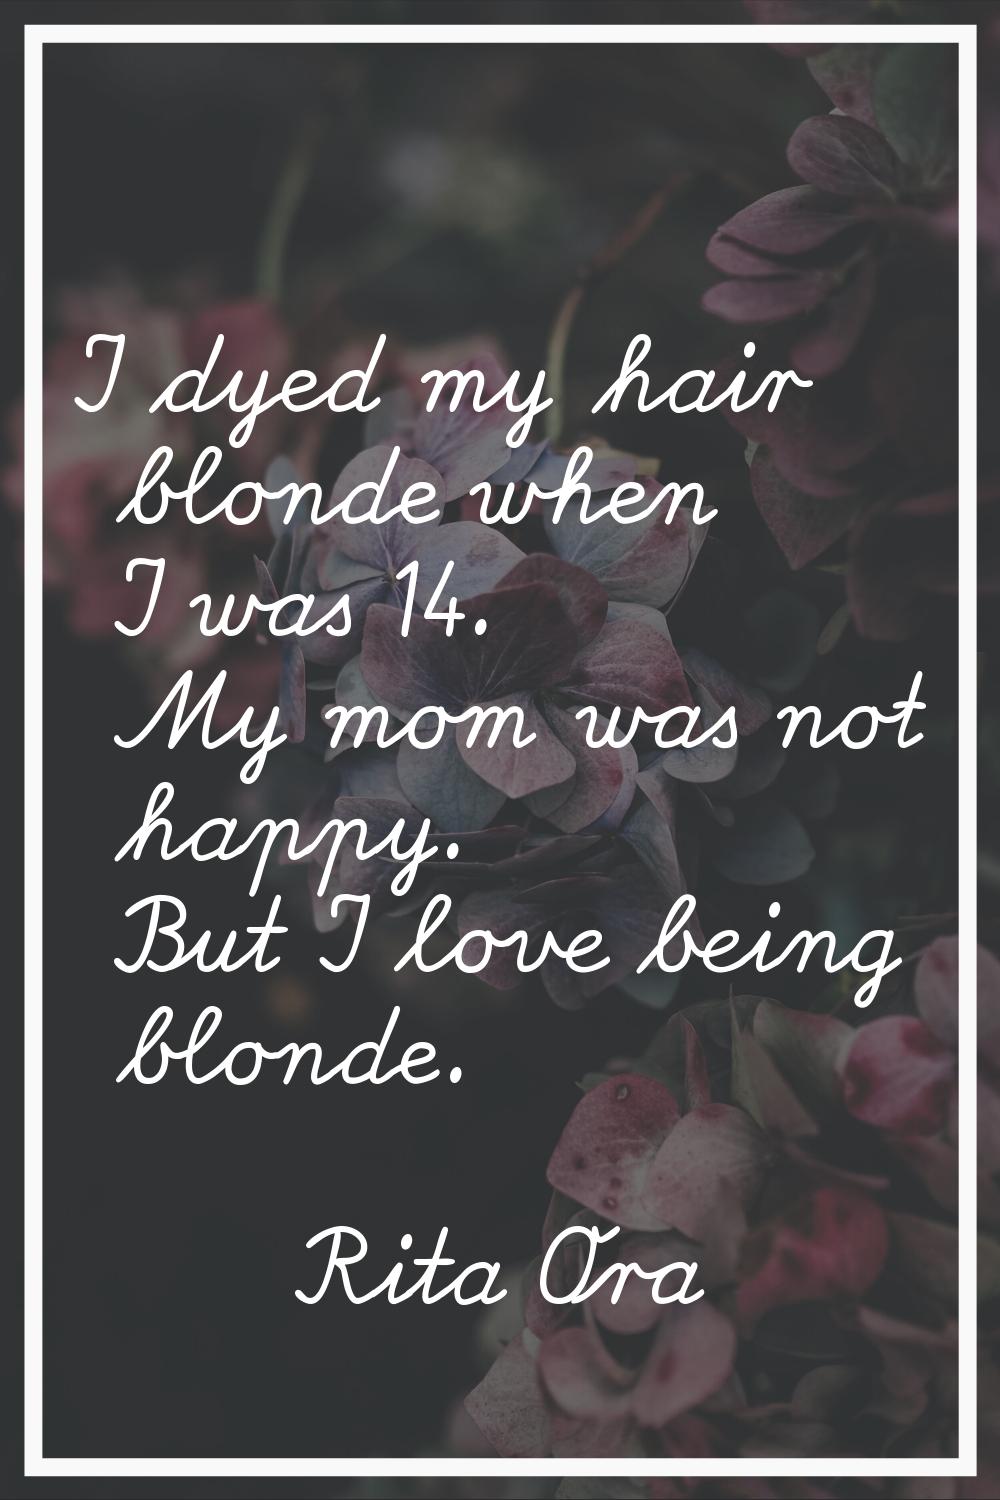 I dyed my hair blonde when I was 14. My mom was not happy. But I love being blonde.